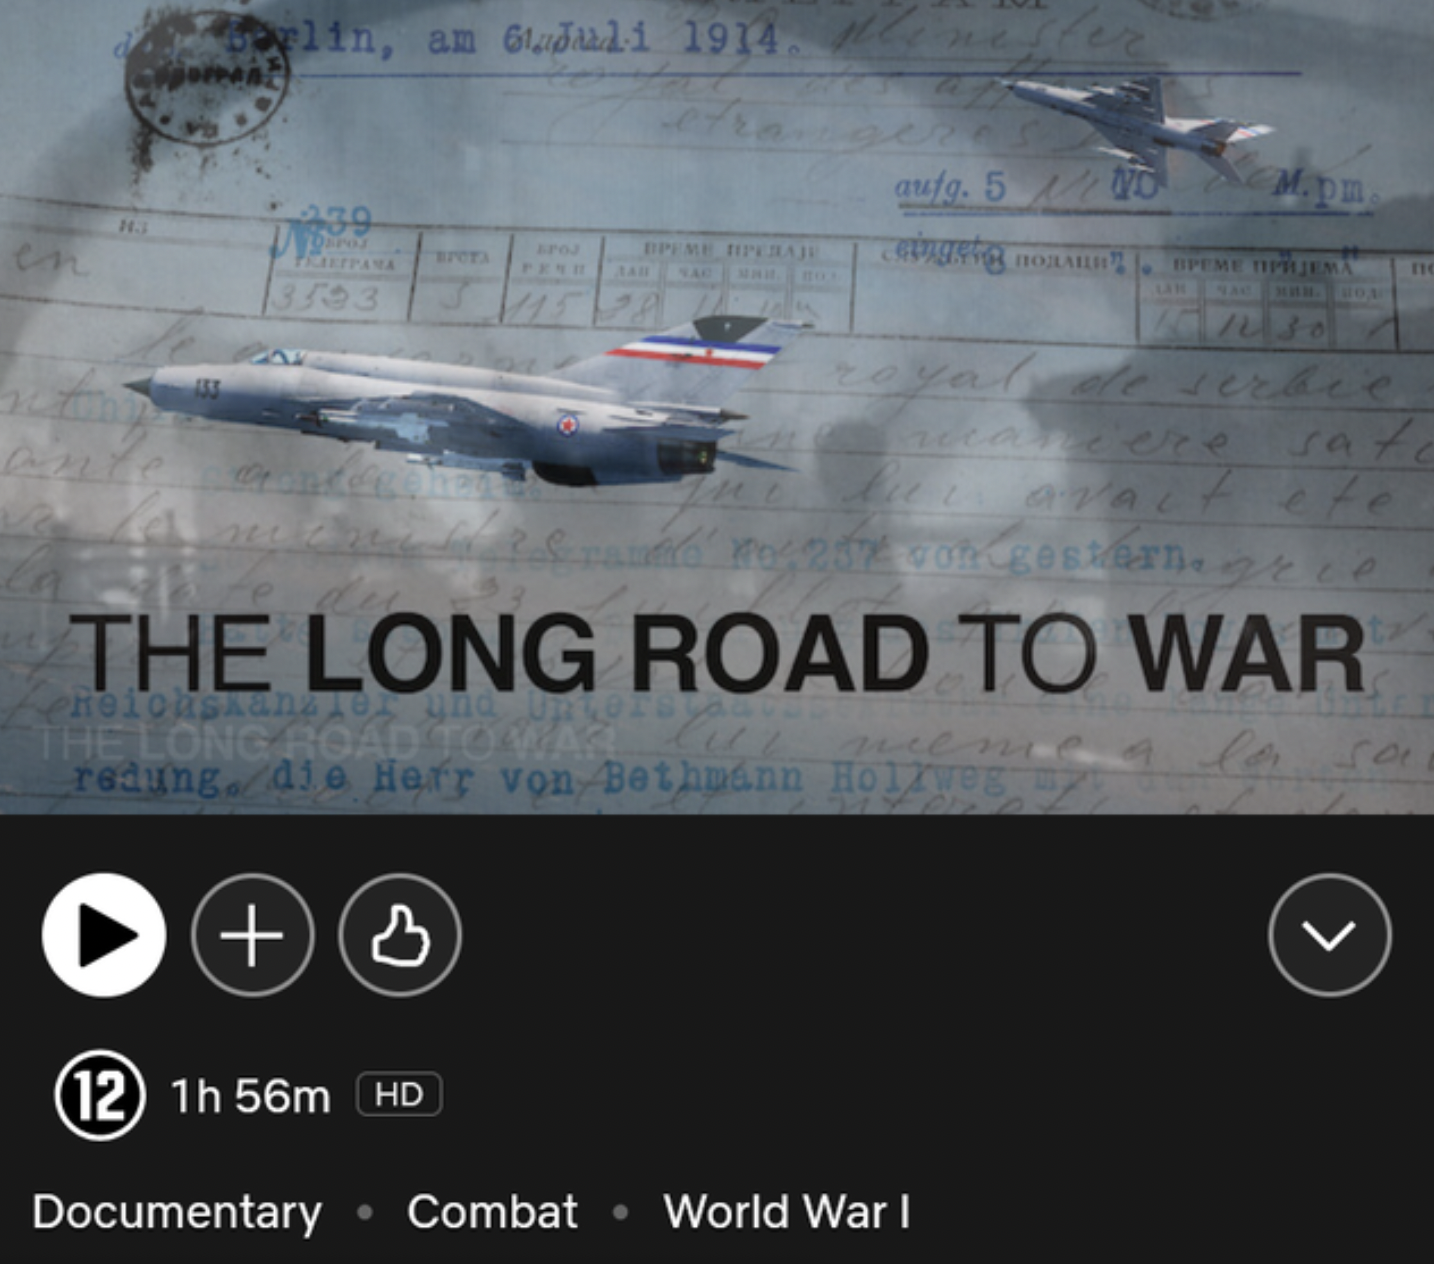 freaky fails - The Long Road To War ensionskan The Long Road Tox redung, die Herr von Bethmann Hol 12 1h 56m Hd Documentary Combat World War I Say >